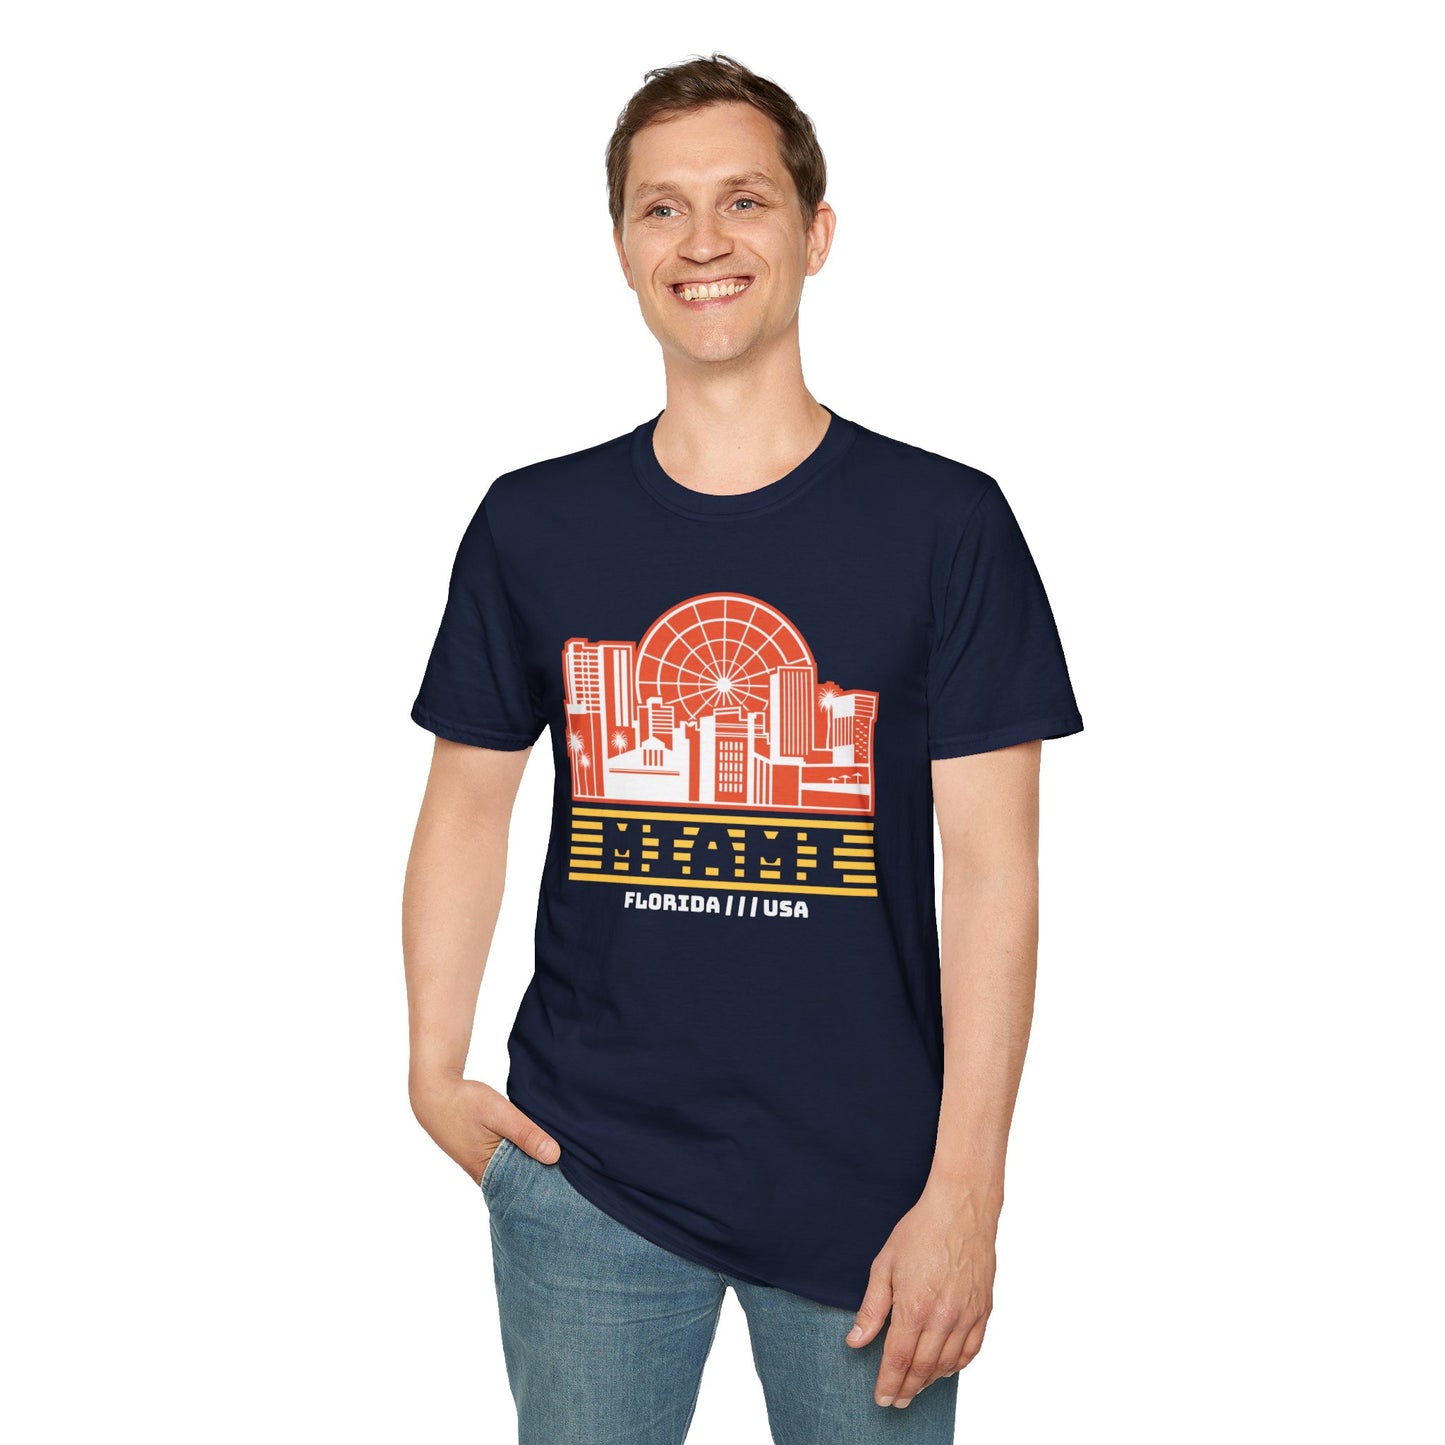 Discover Sunshine State Vibes with Our Stylish Miami Florida T-Shirt